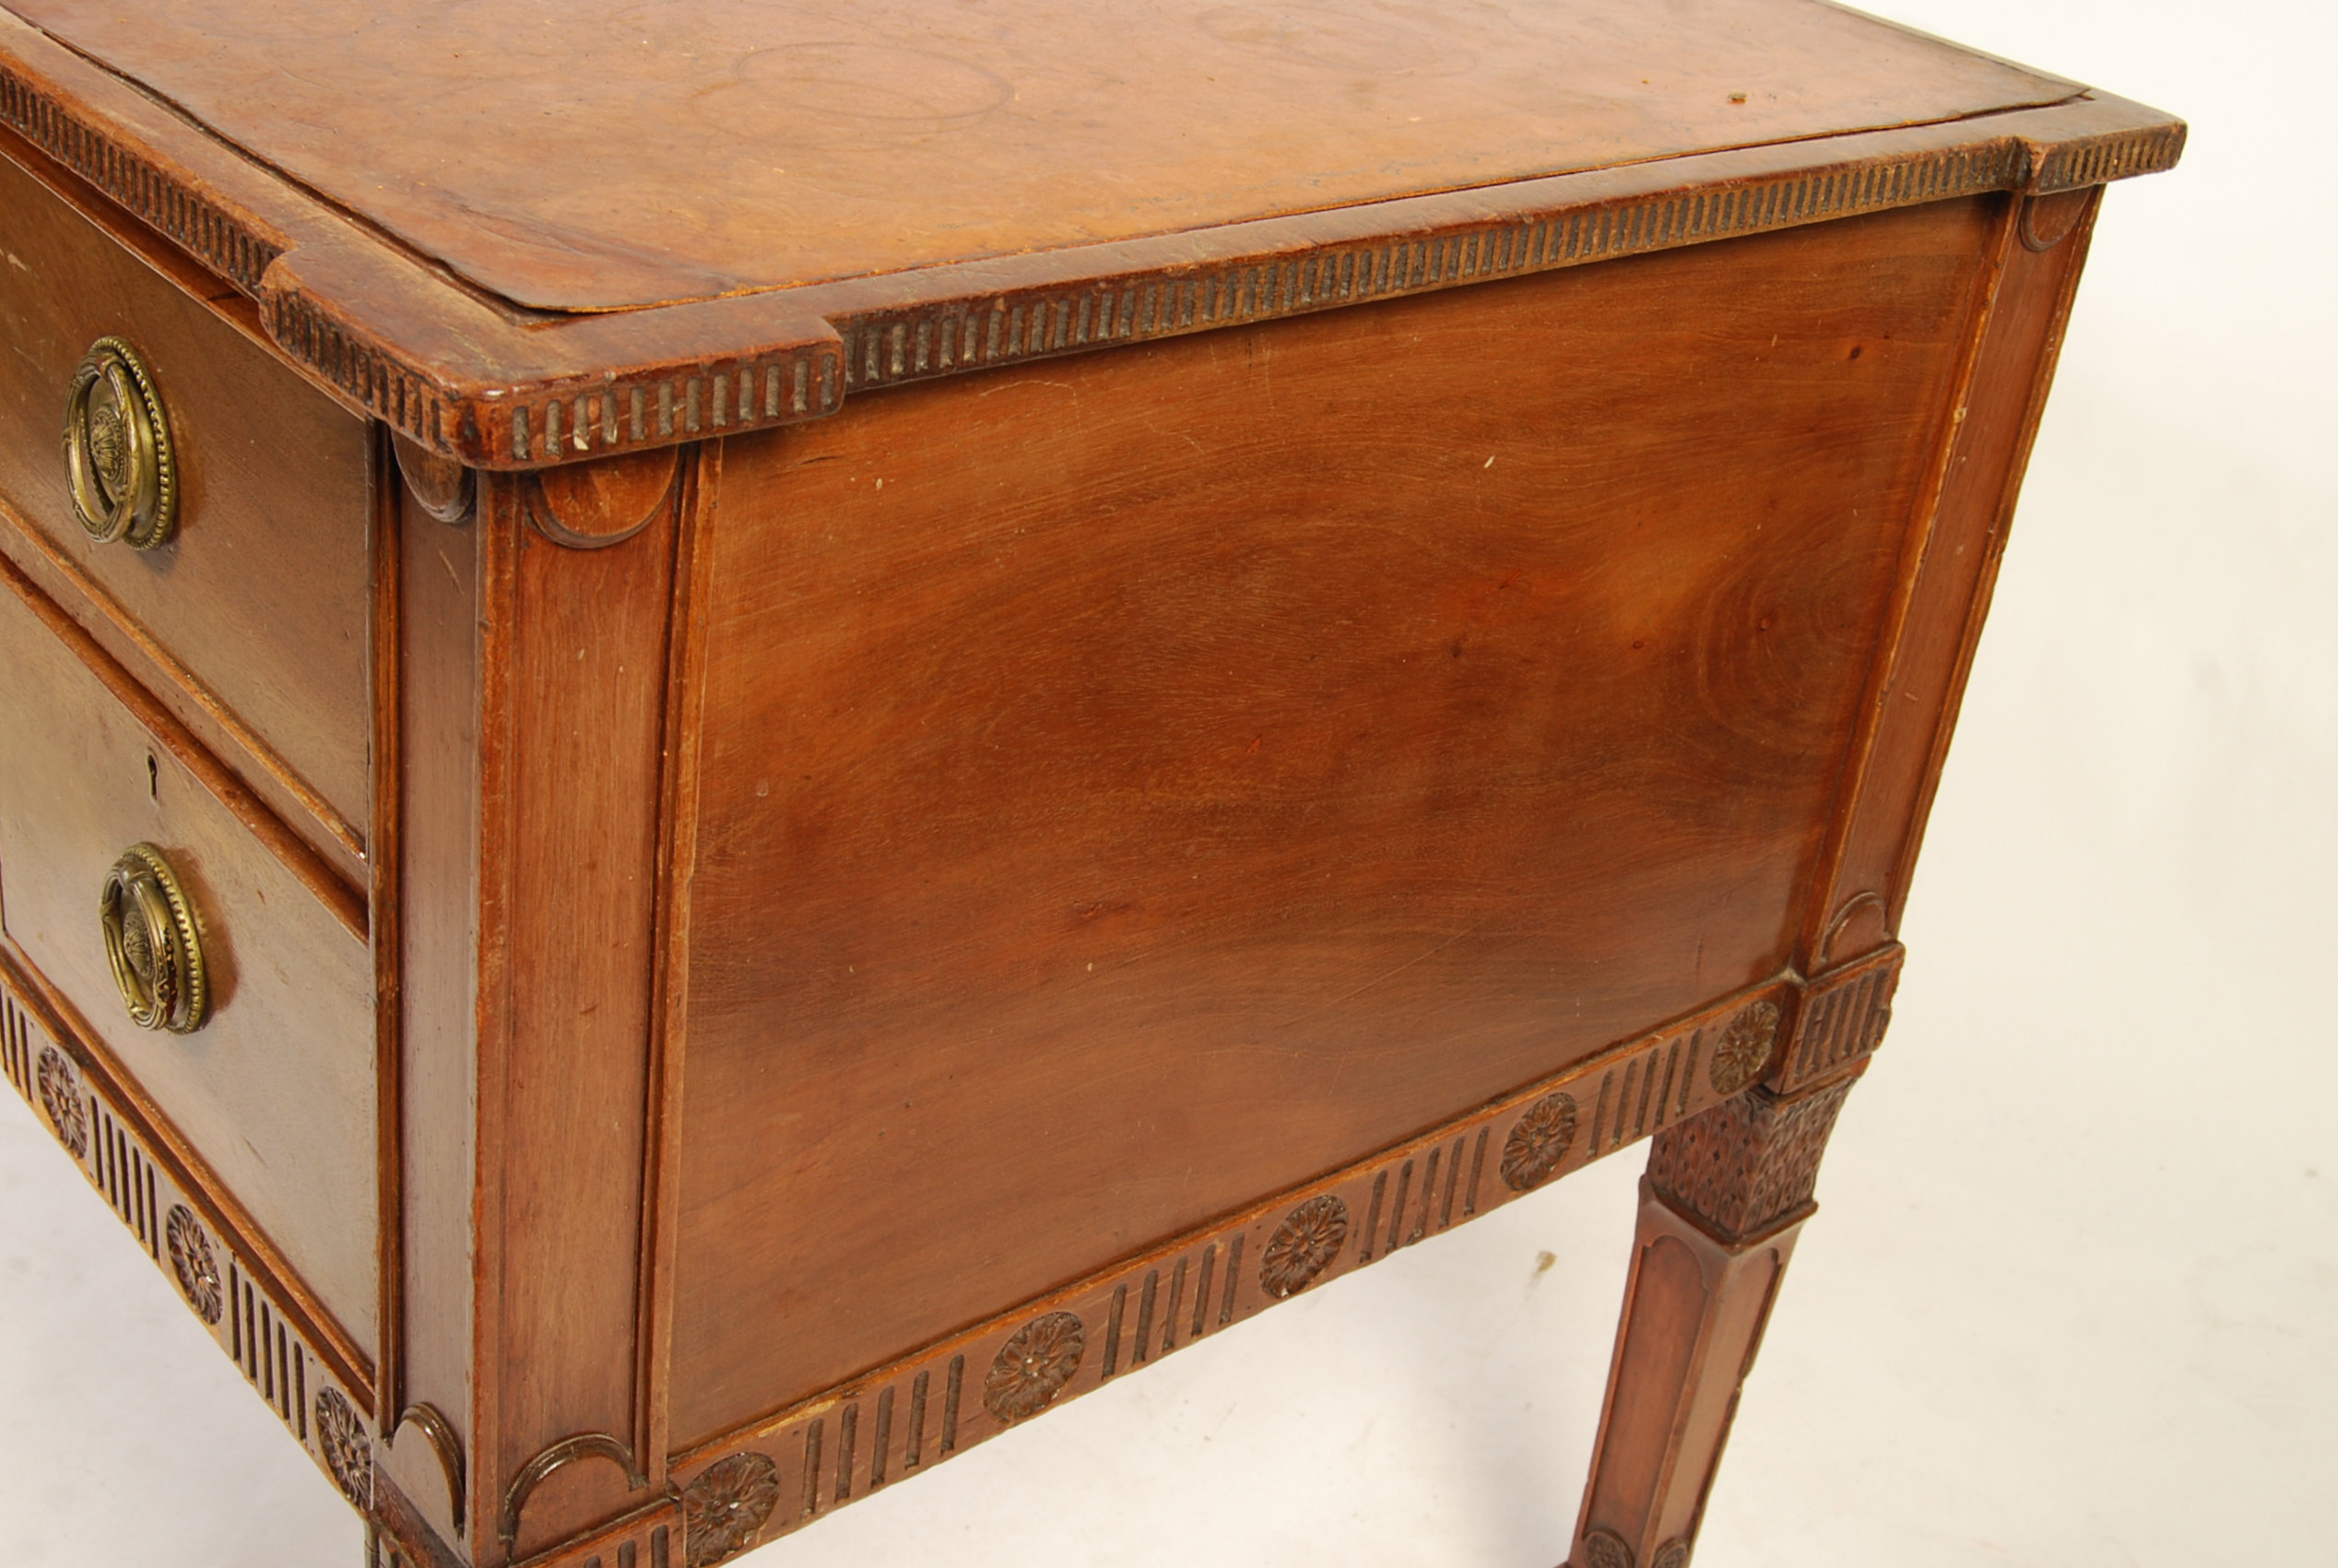 CHIPPENDALE REVIVAL LEATHER AND MAHOGANY DESK - Image 4 of 7